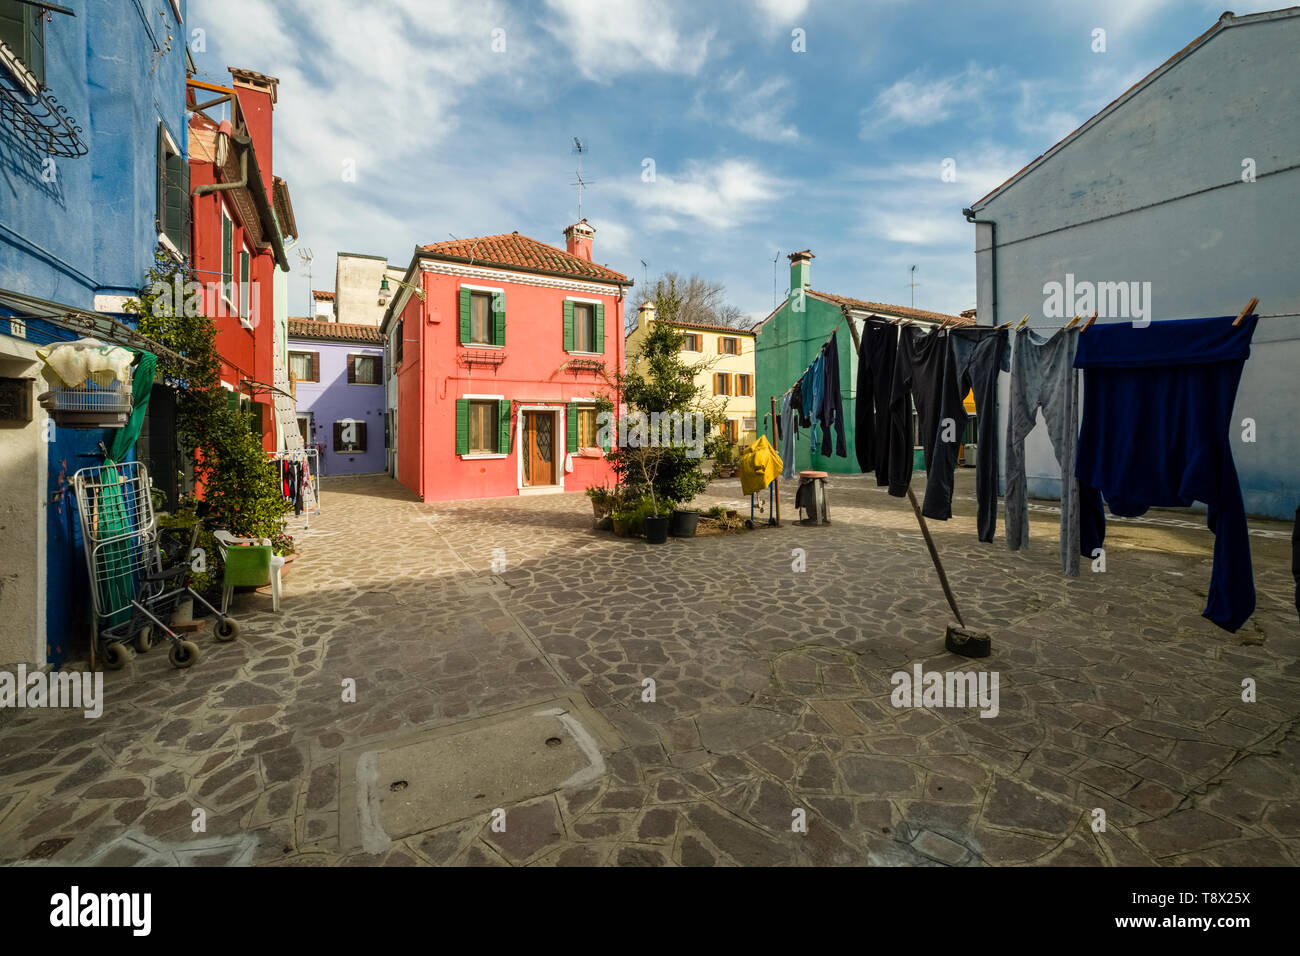 Colorfully painted houses on the island Burano, laundry is put up on washing lines Stock Photo